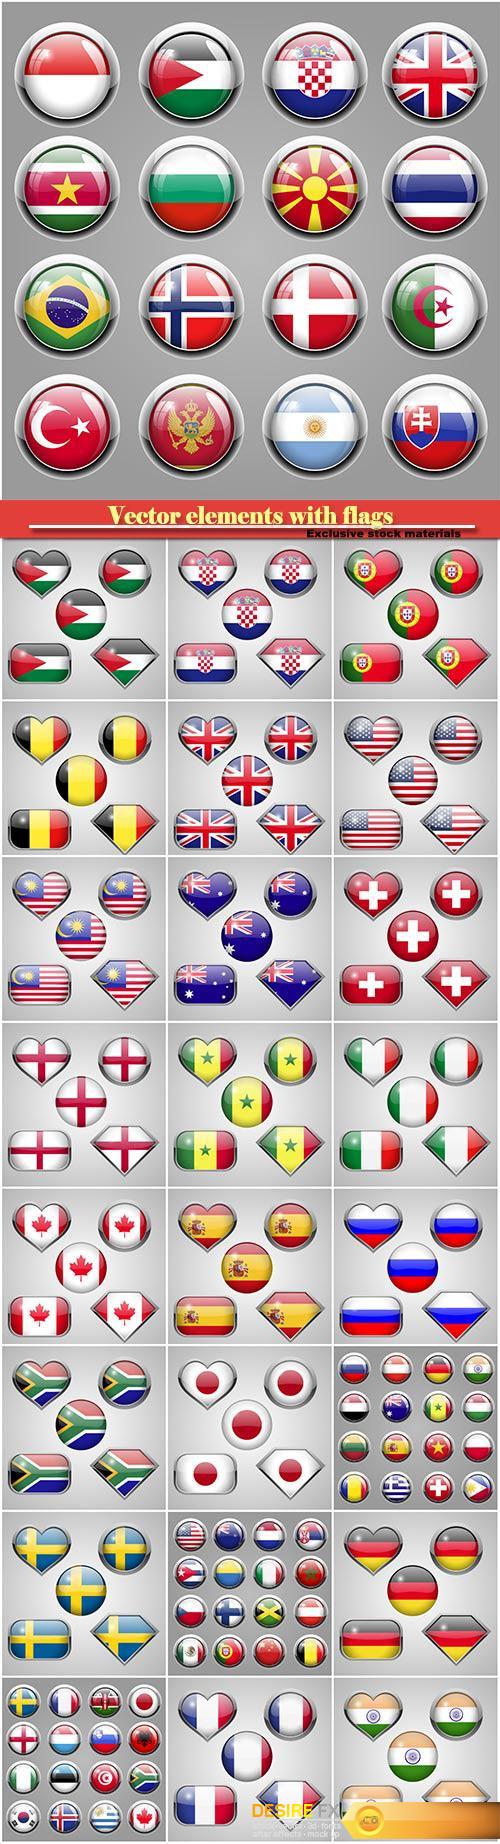 Vector elements flags of different countries of the world